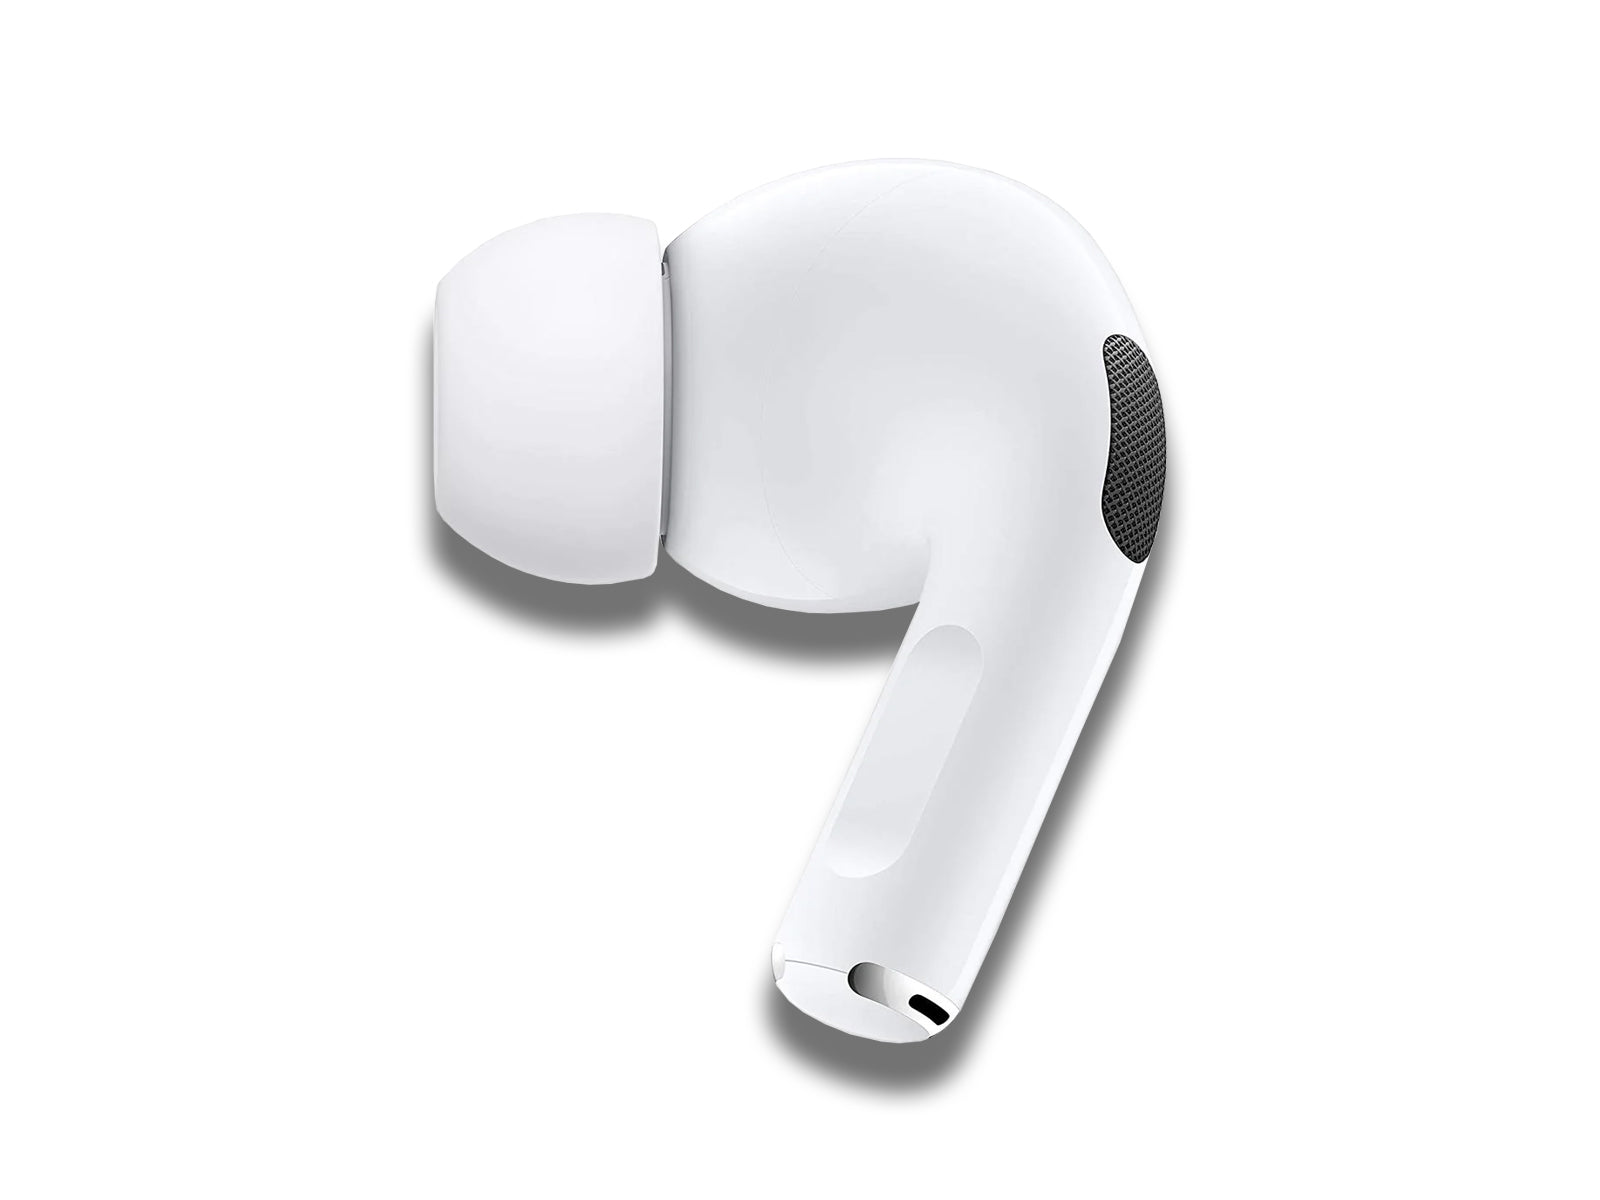 Image shows a single AirPod Pro on a white background